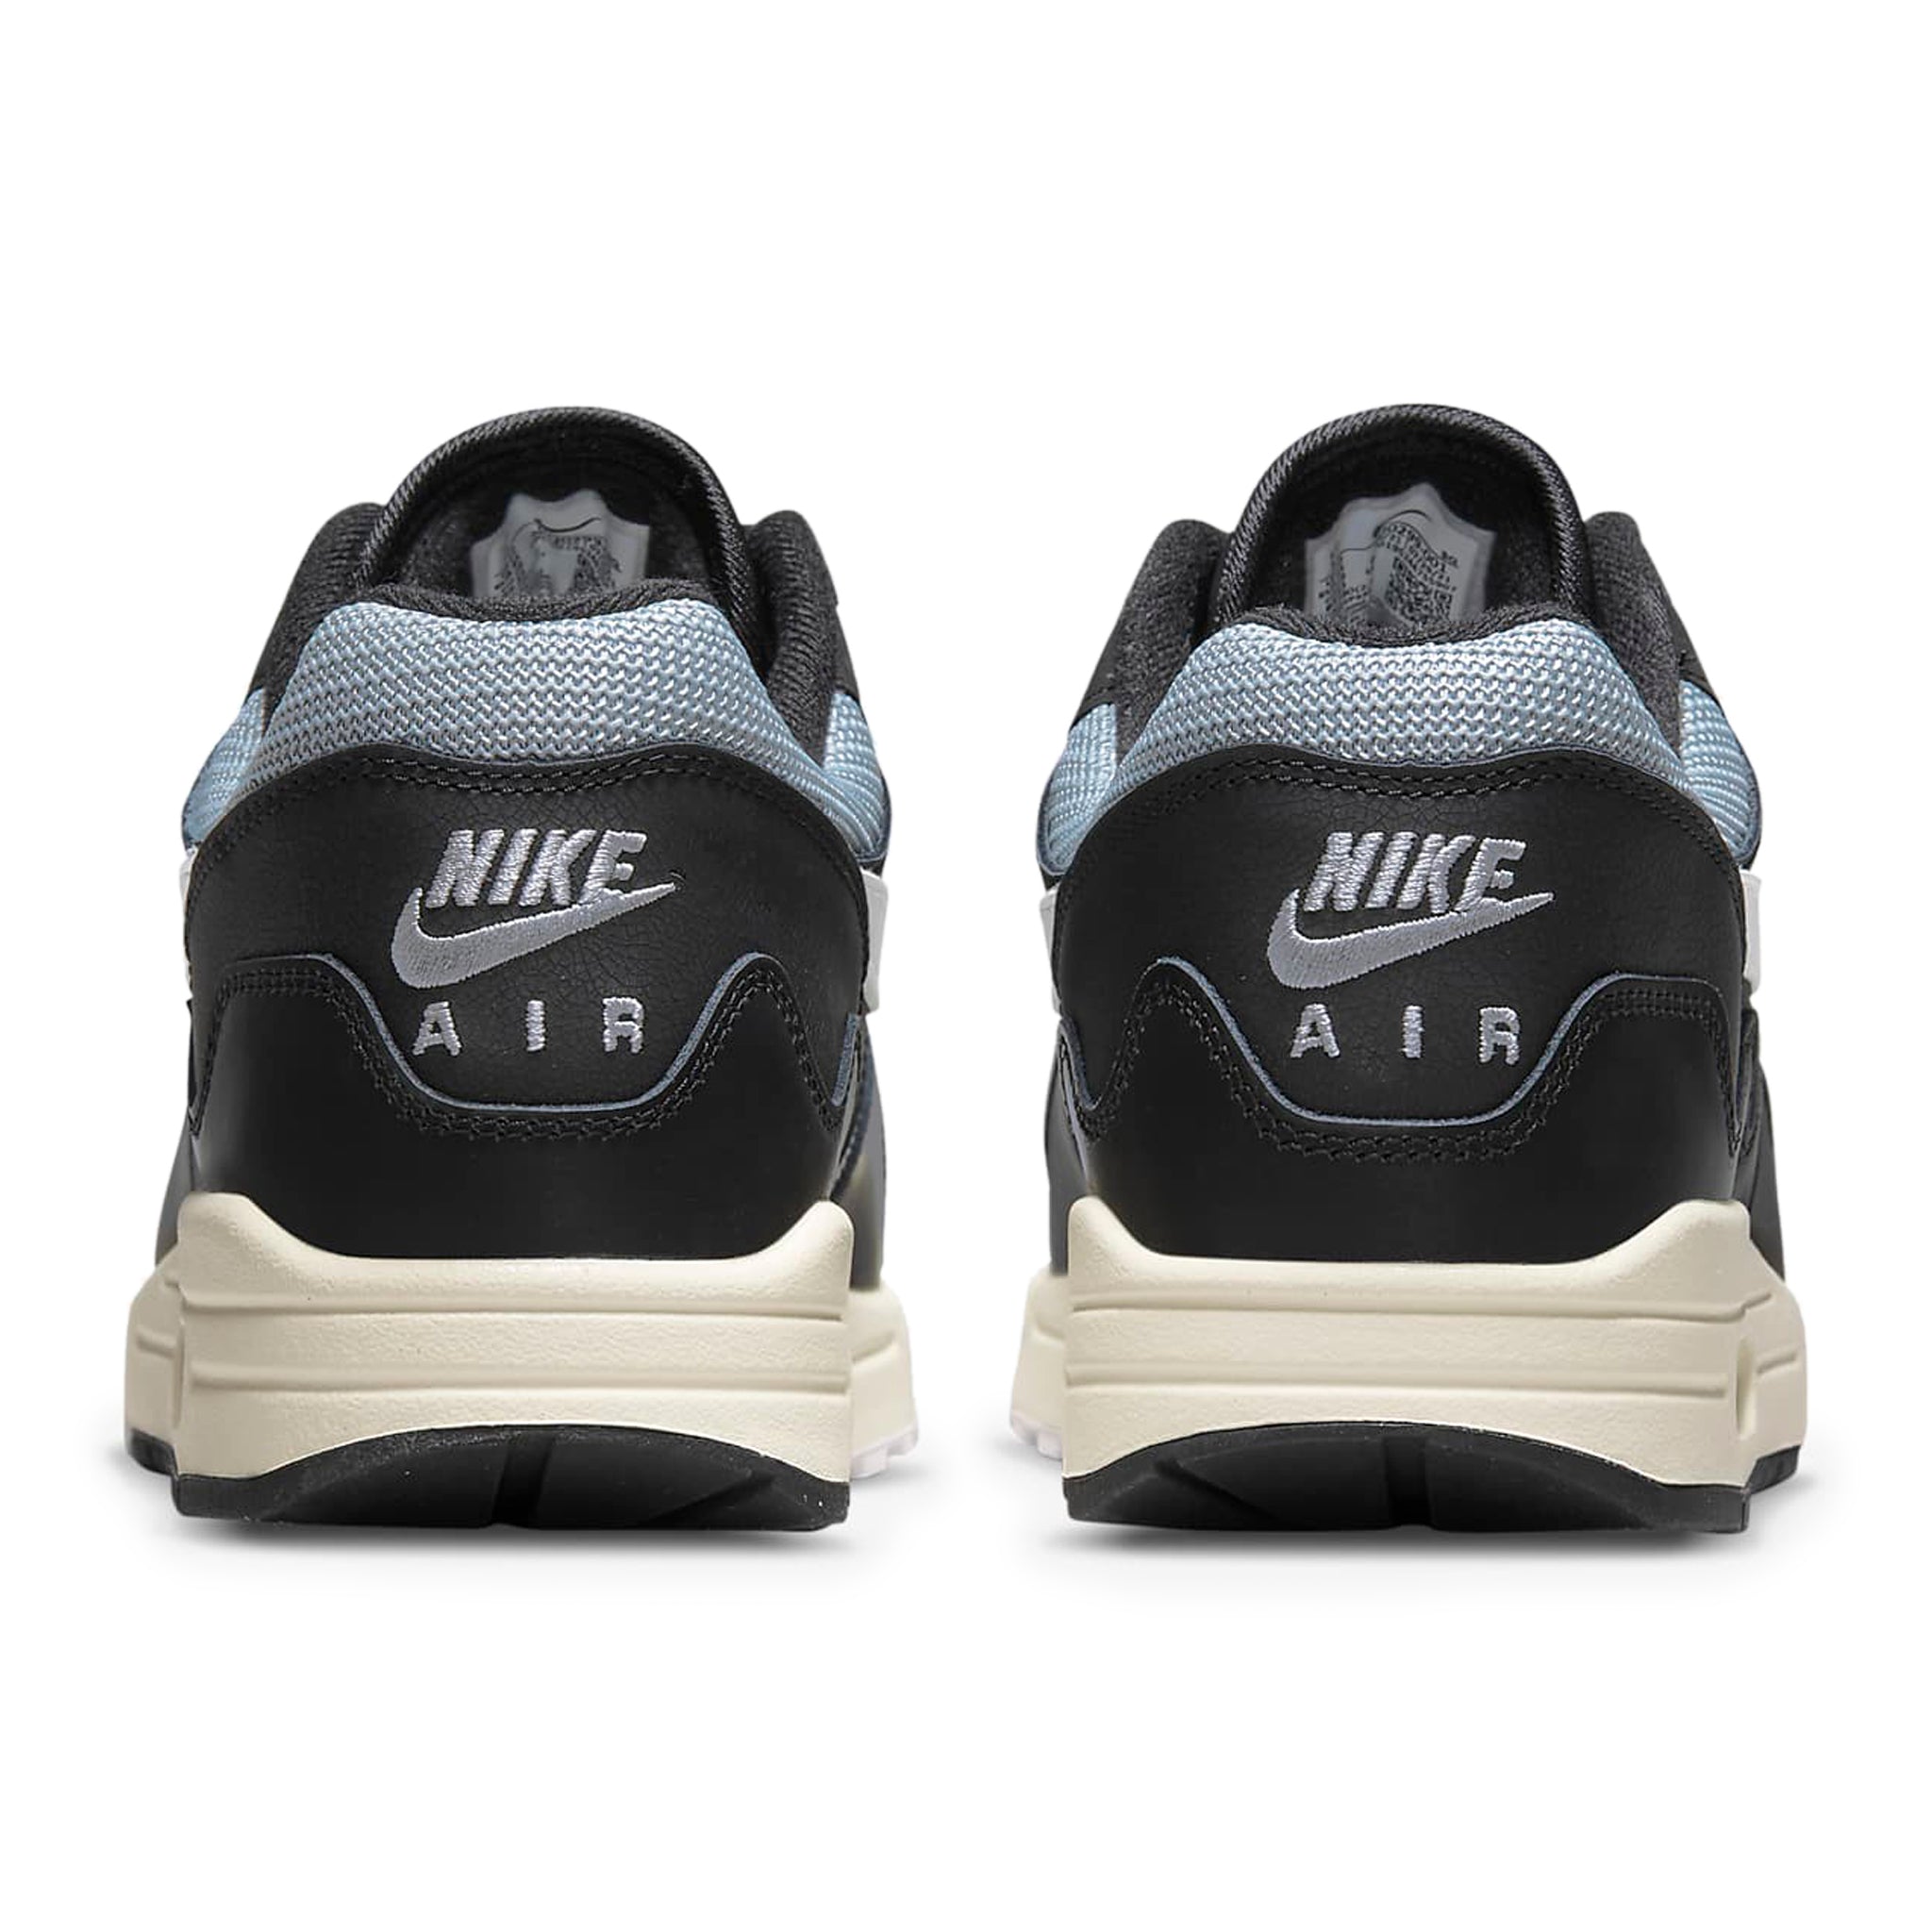 Heel view of Nike Air Max 1 Patta Waves Black (With Bracelet) DQ0299-001